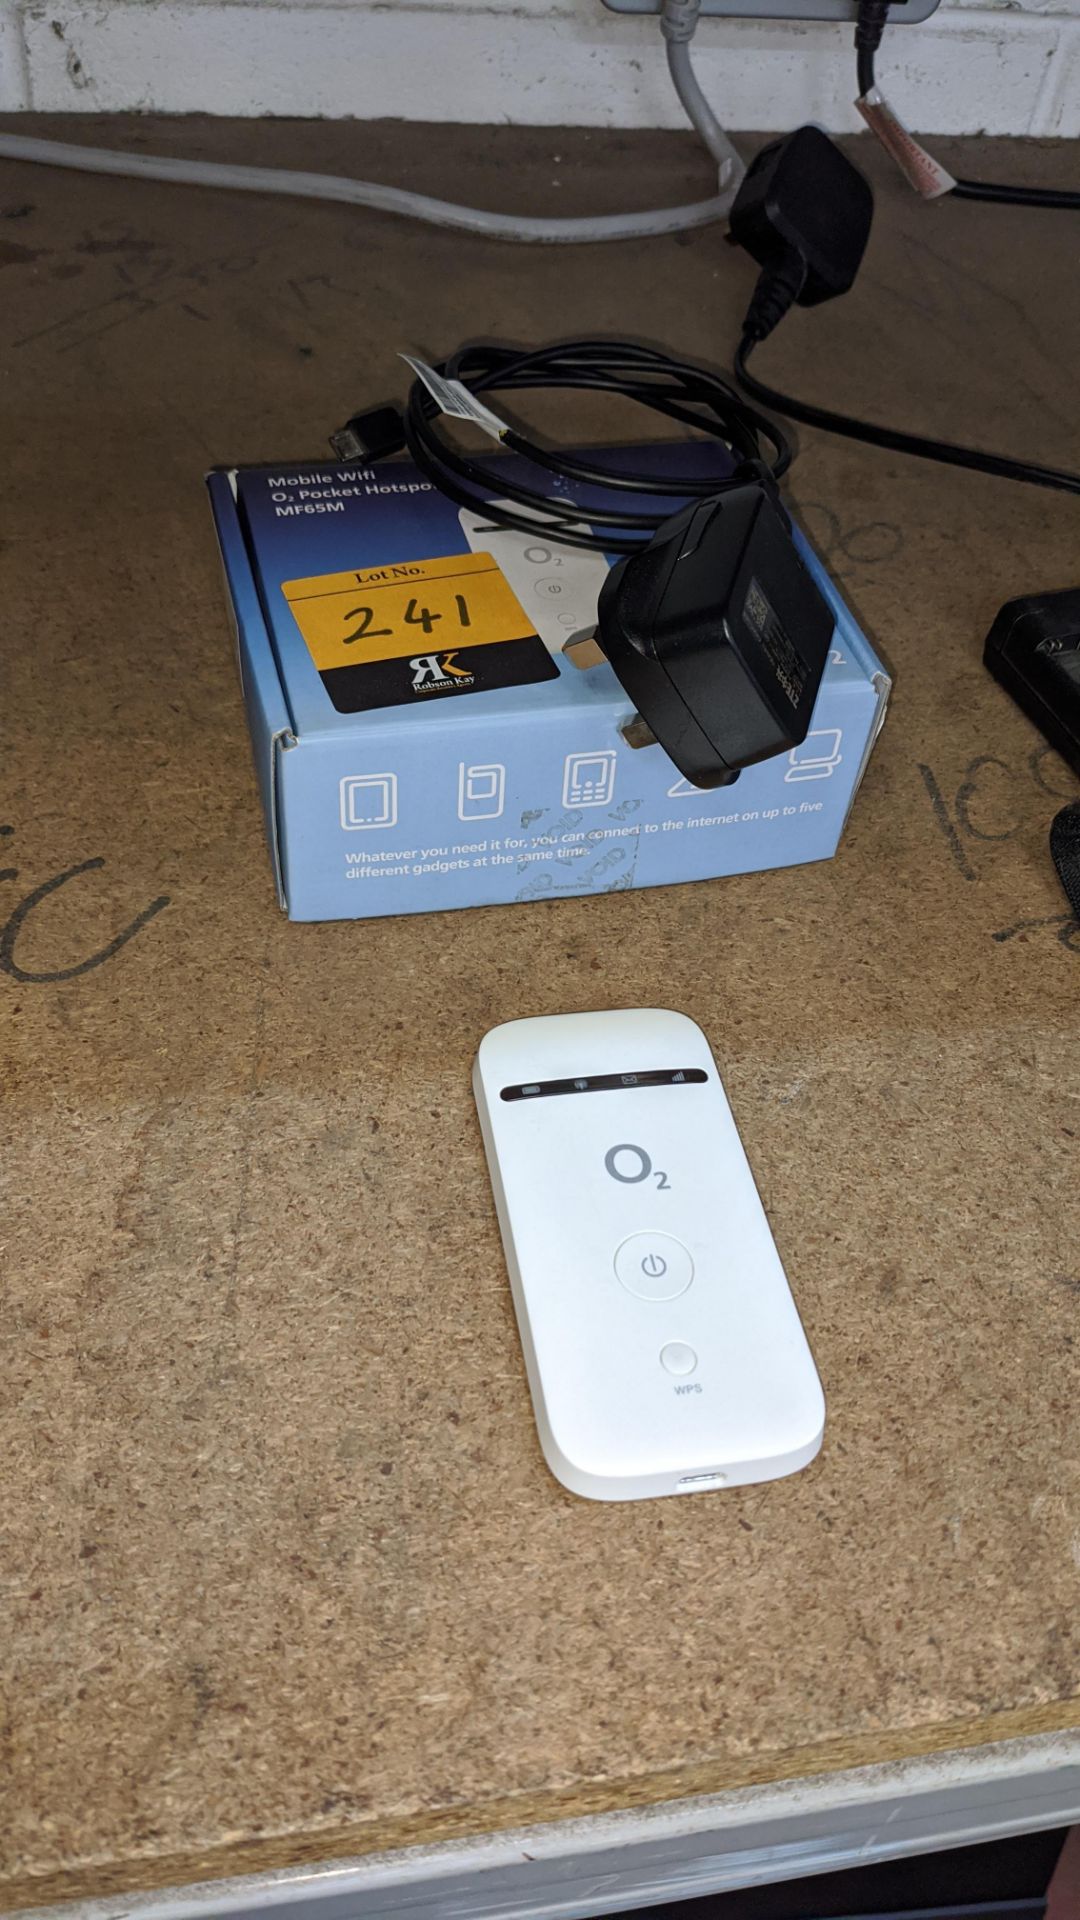 Mobile Wi-Fi O2 pocket hot spot including box & charger